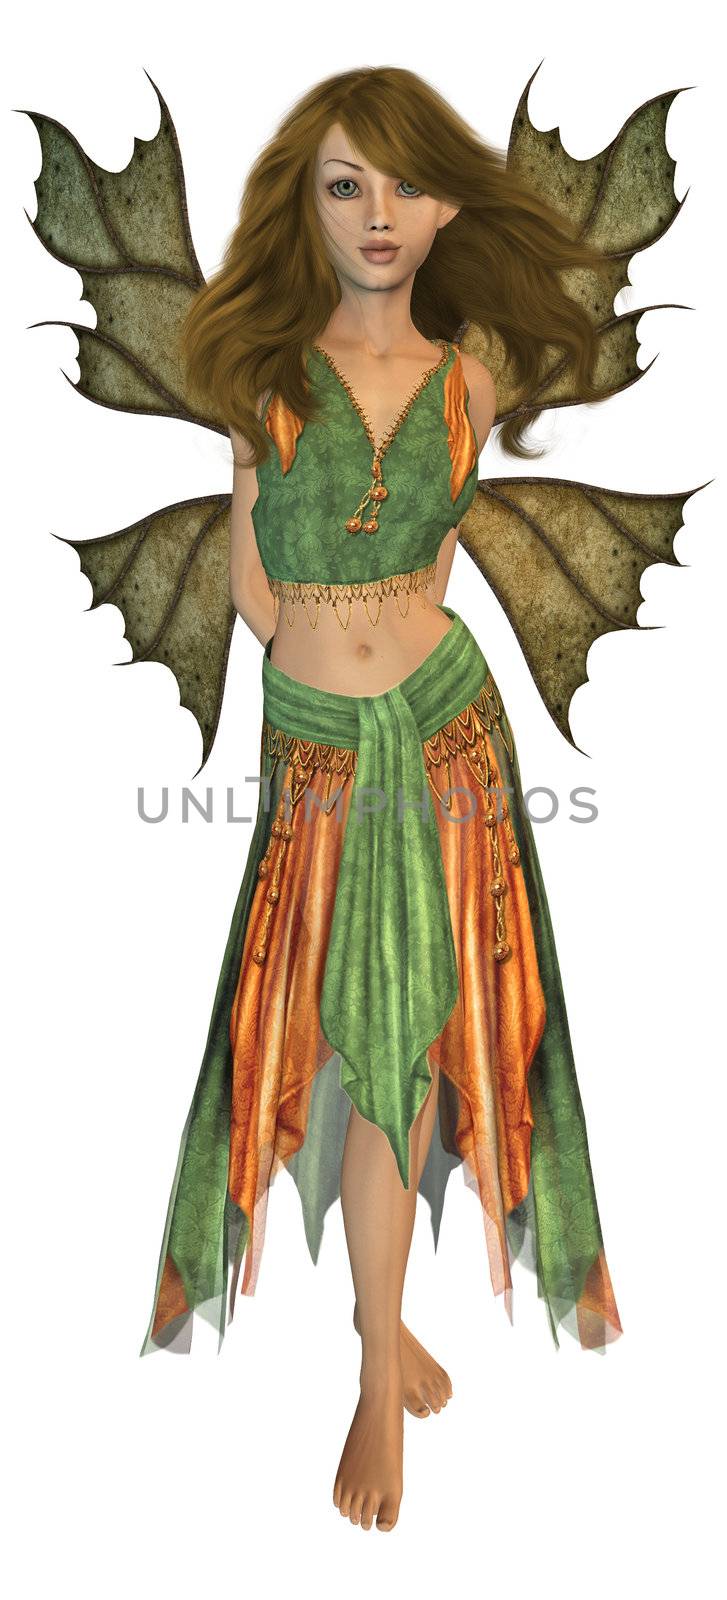 Green and orange fairy standing up